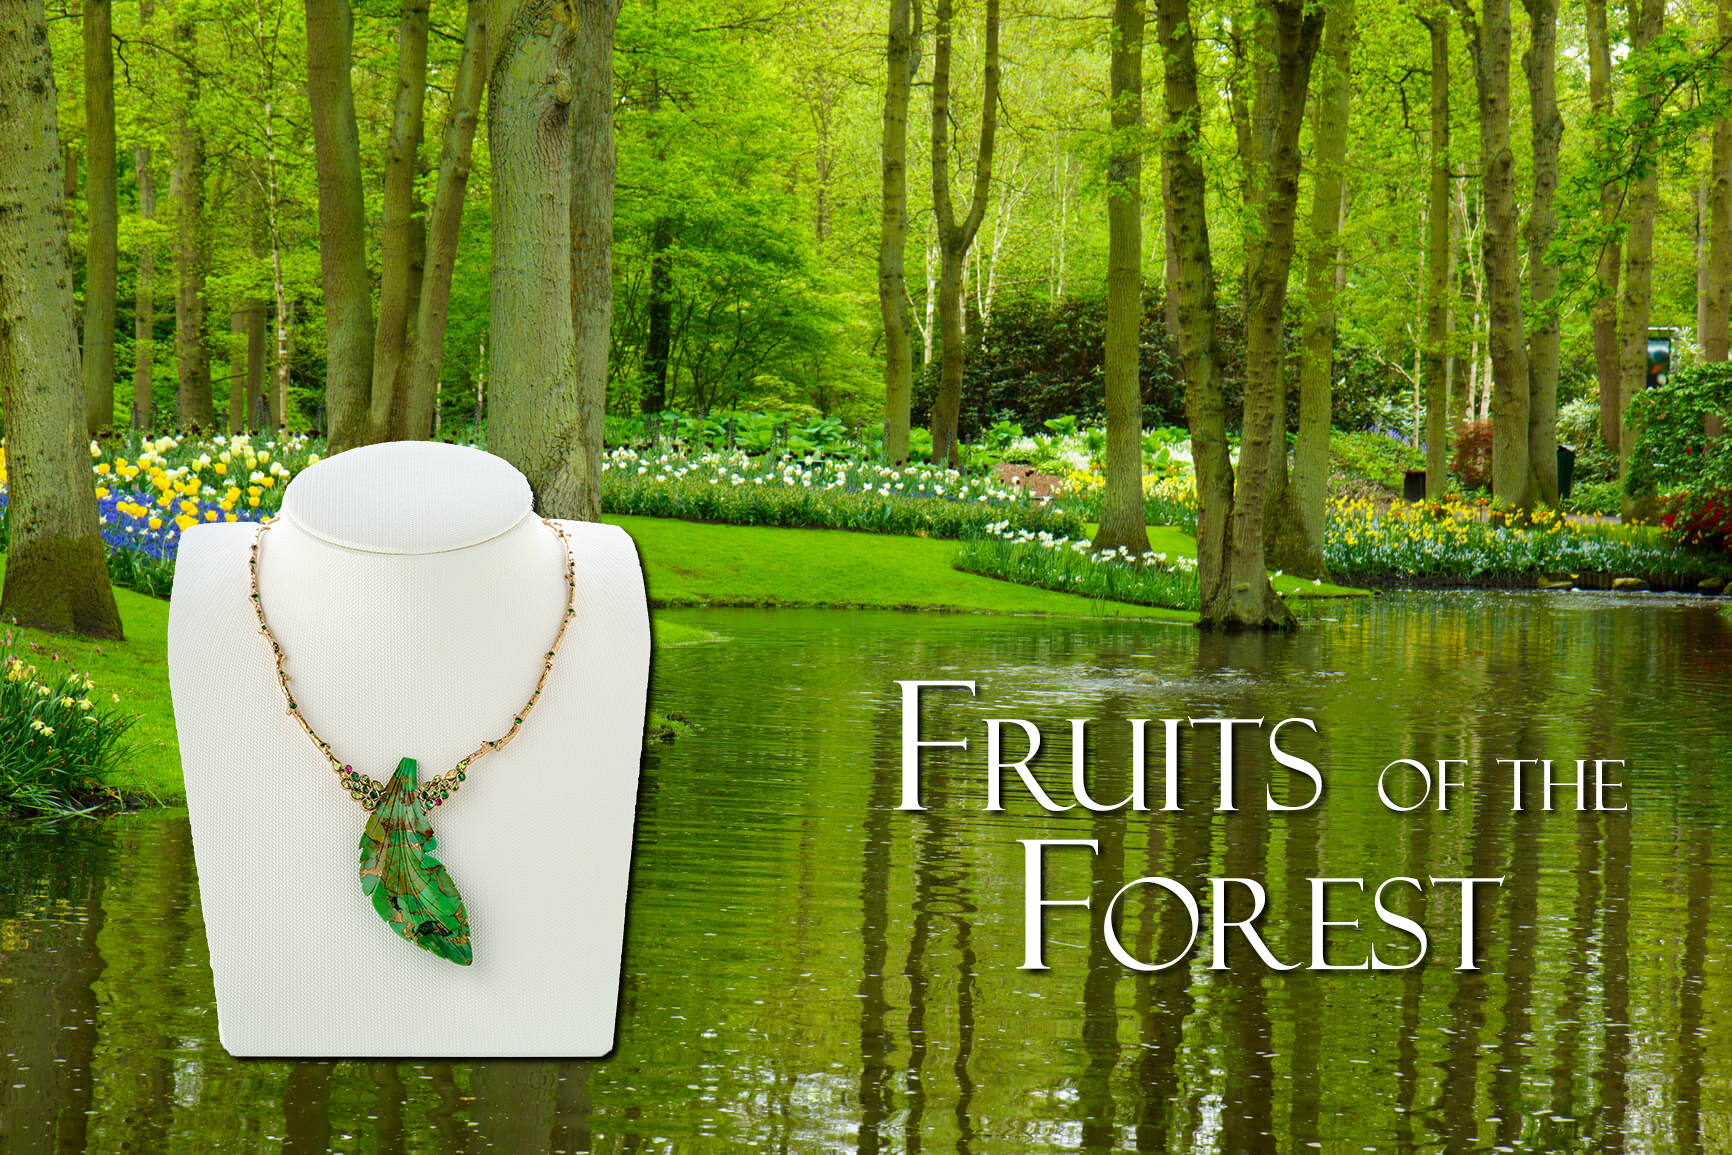 Jaime-Moreno-Art-in-Fine-Jewelry-Fruits-of-the-forest-Poster-C122